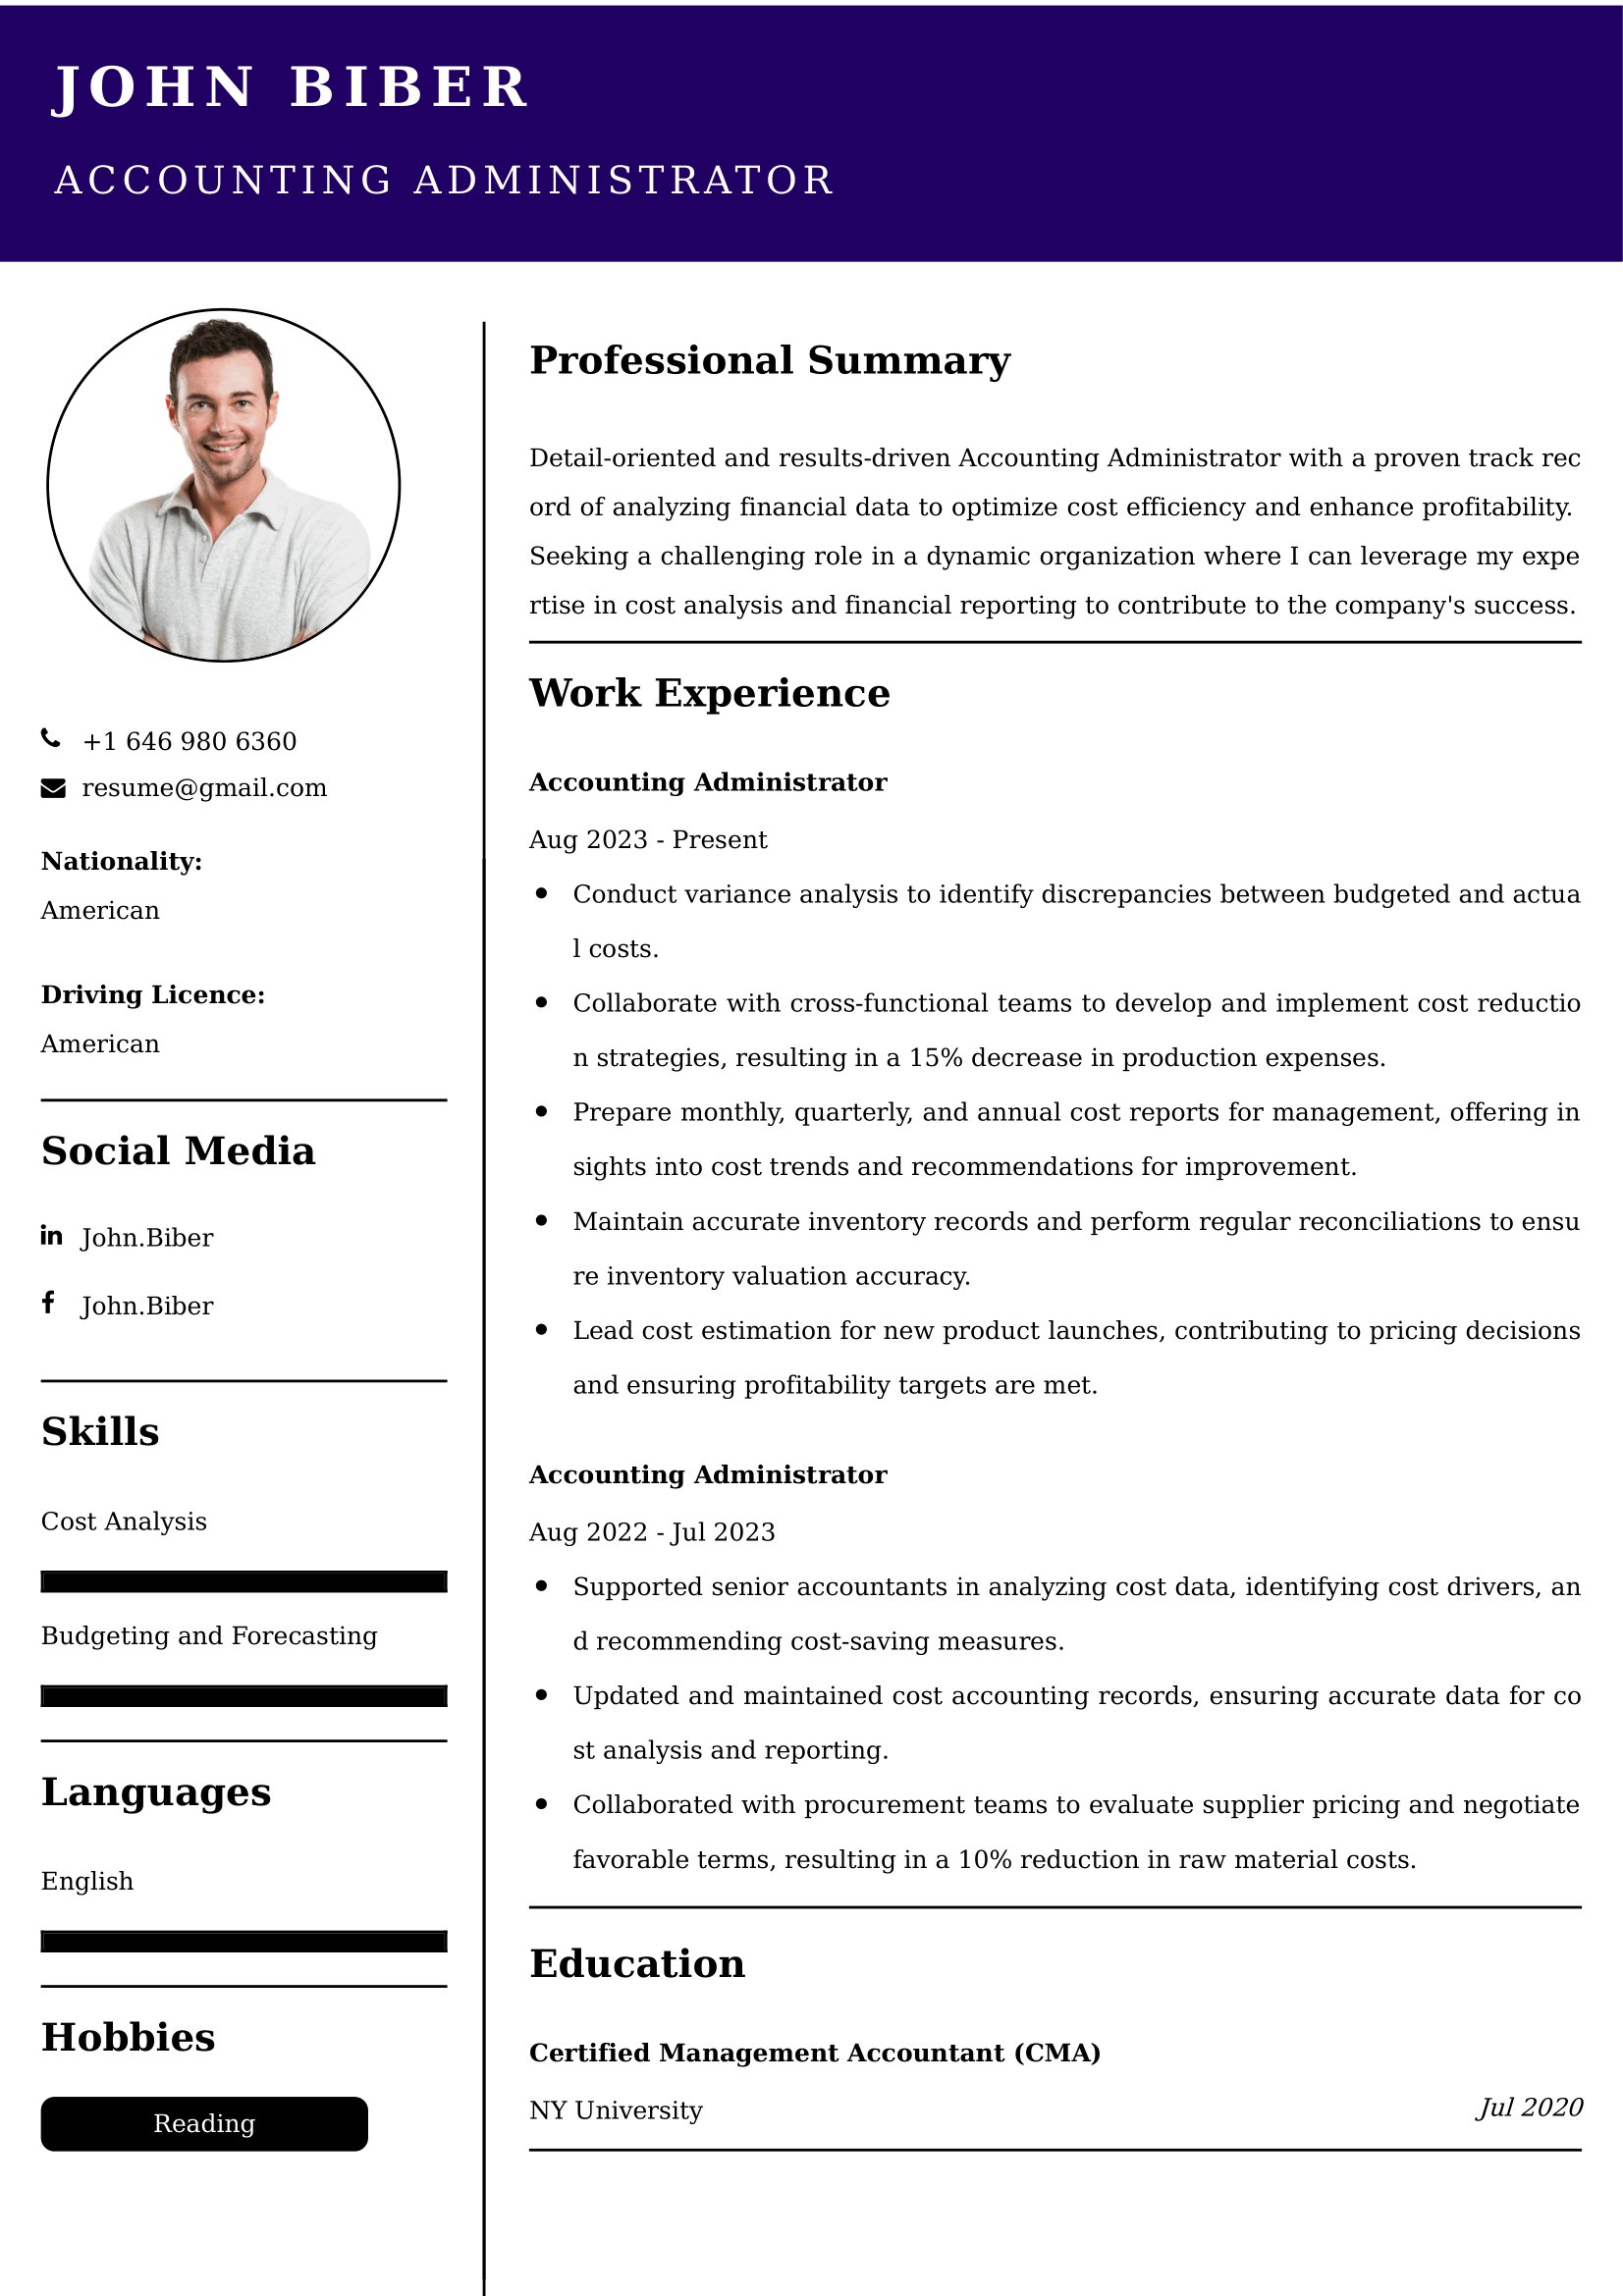 Accounting Administrator Resume Examples - UAE Format and Tips.